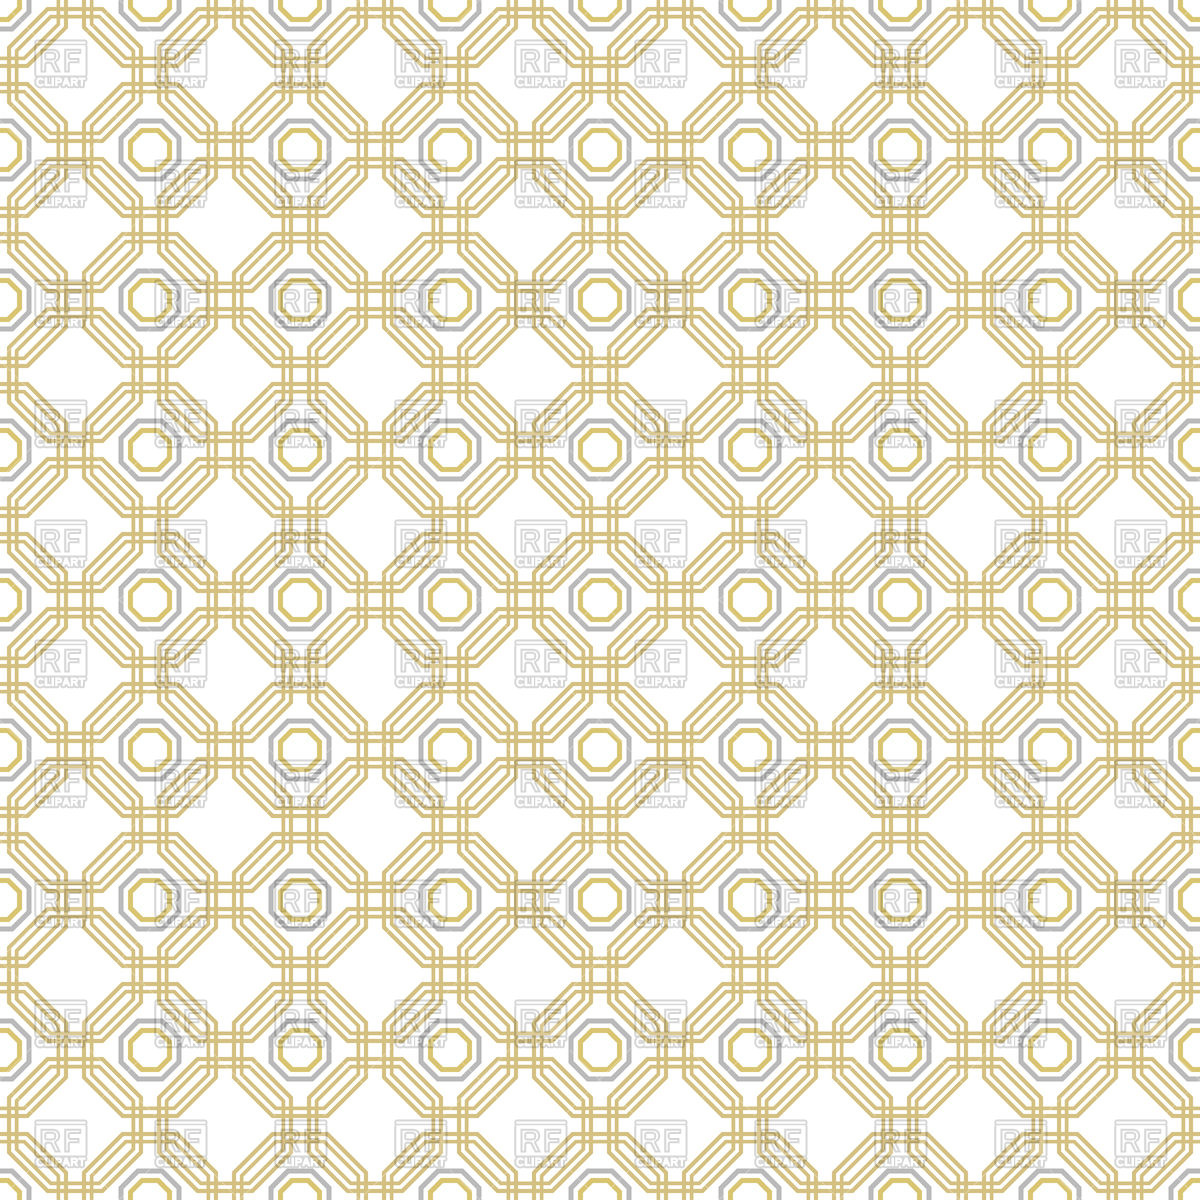 Geometric Abstract Golden Octagon Background Vector Image Of